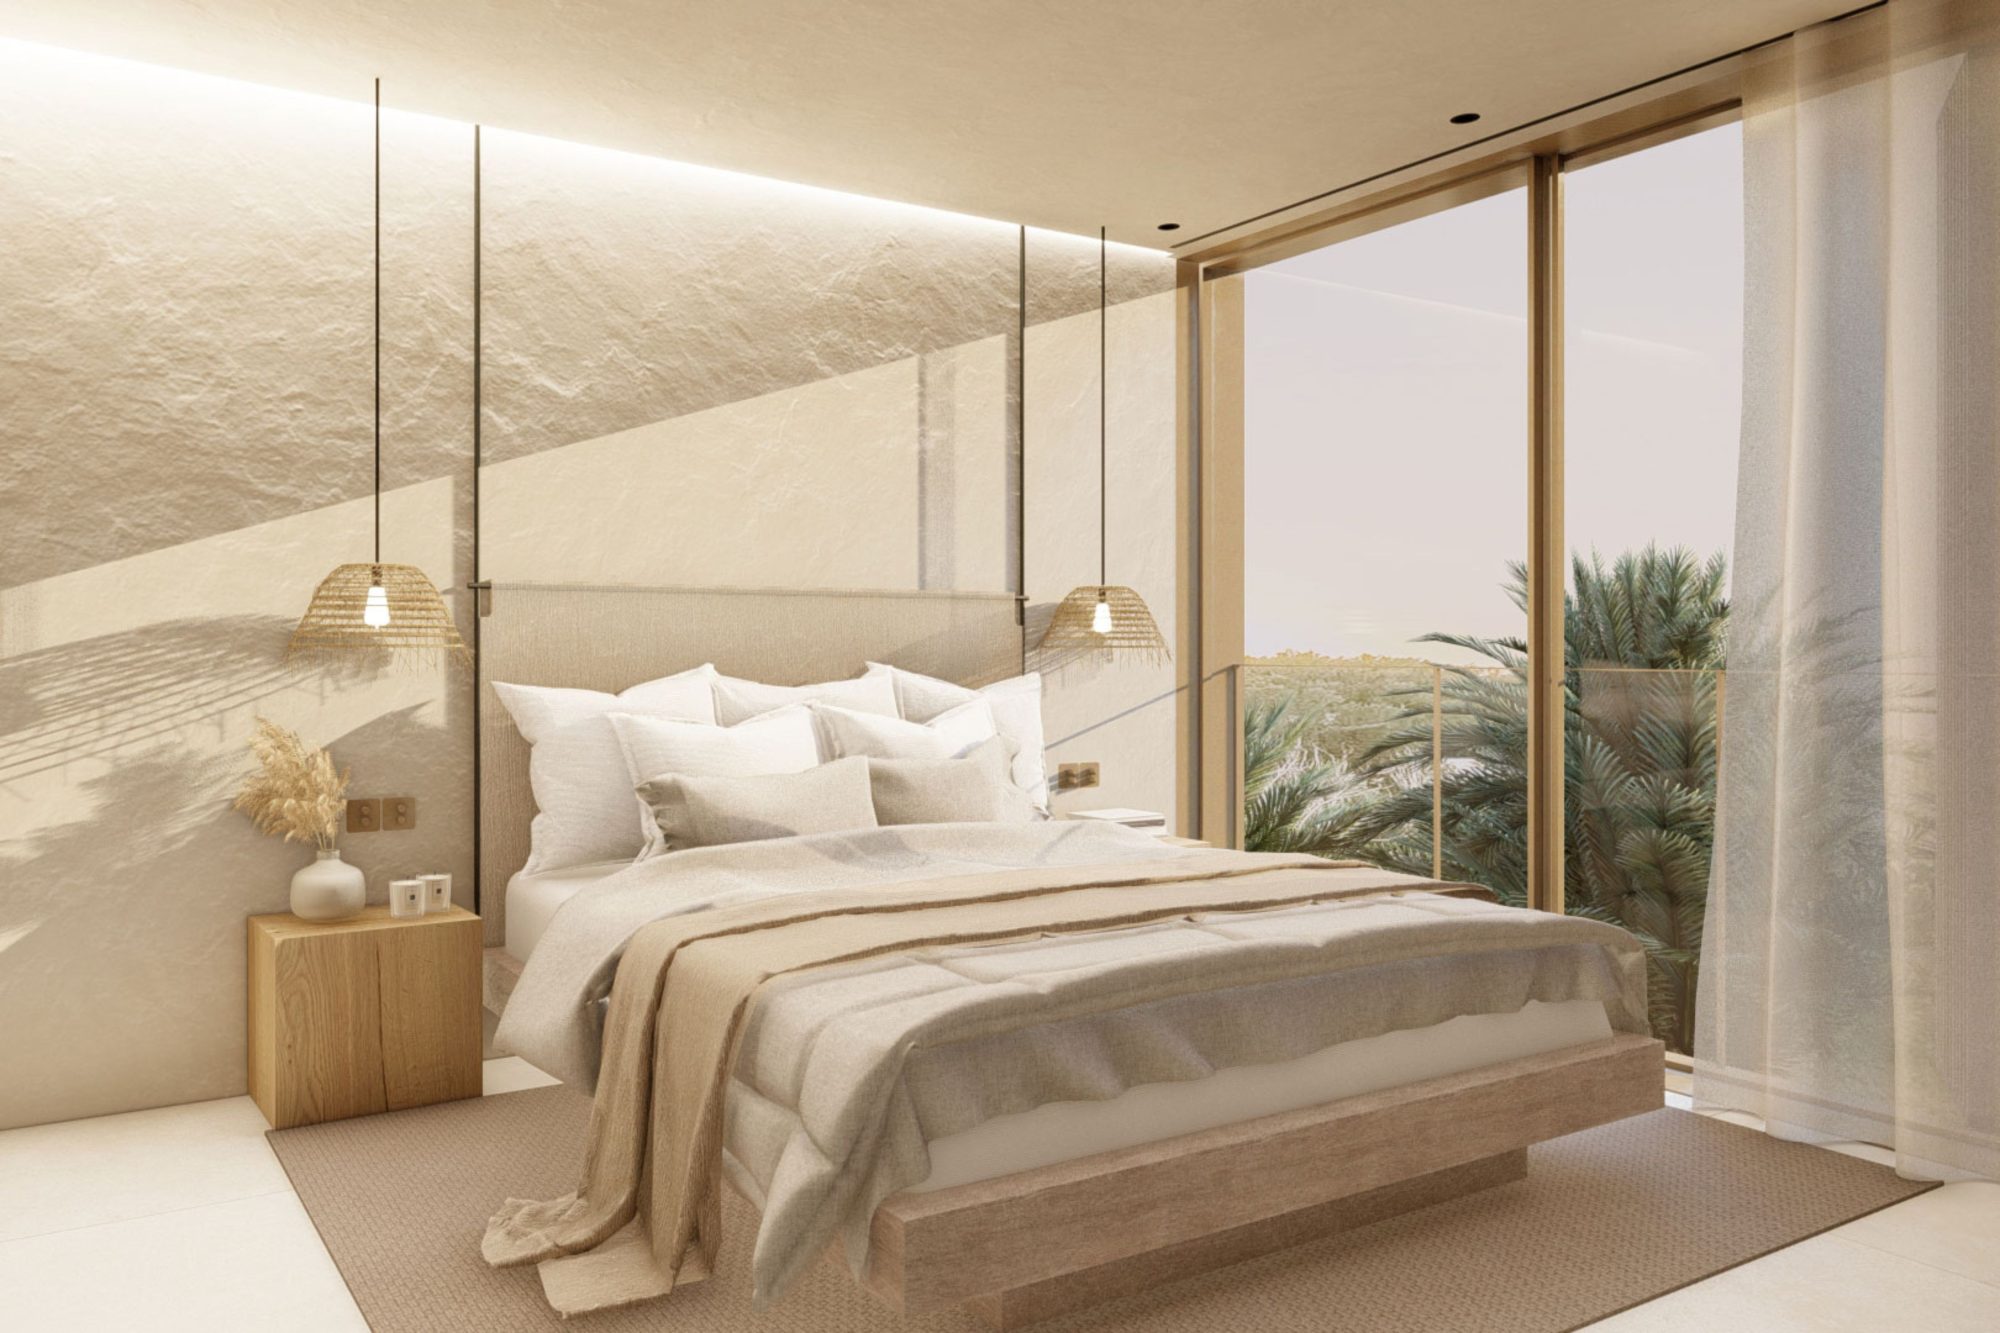 Torres Heights fuses the Mediterranean concept of slow living with cosmopolitan urban vibes in Ibiza